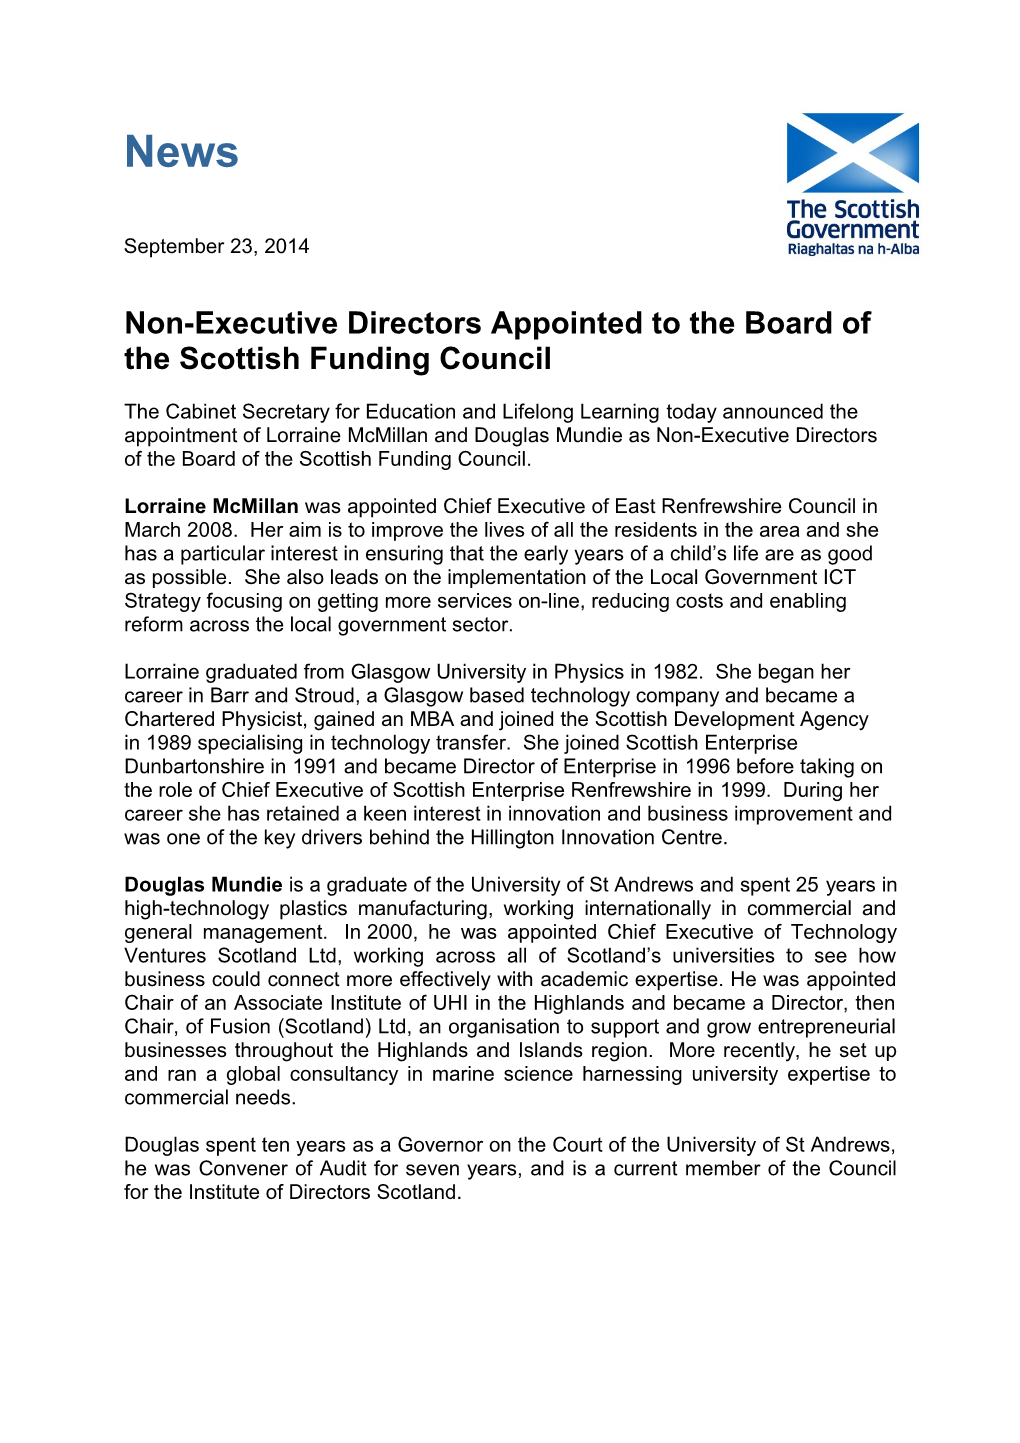 Non-Executive Directors Appointed to the Board of the Scottish Funding Council